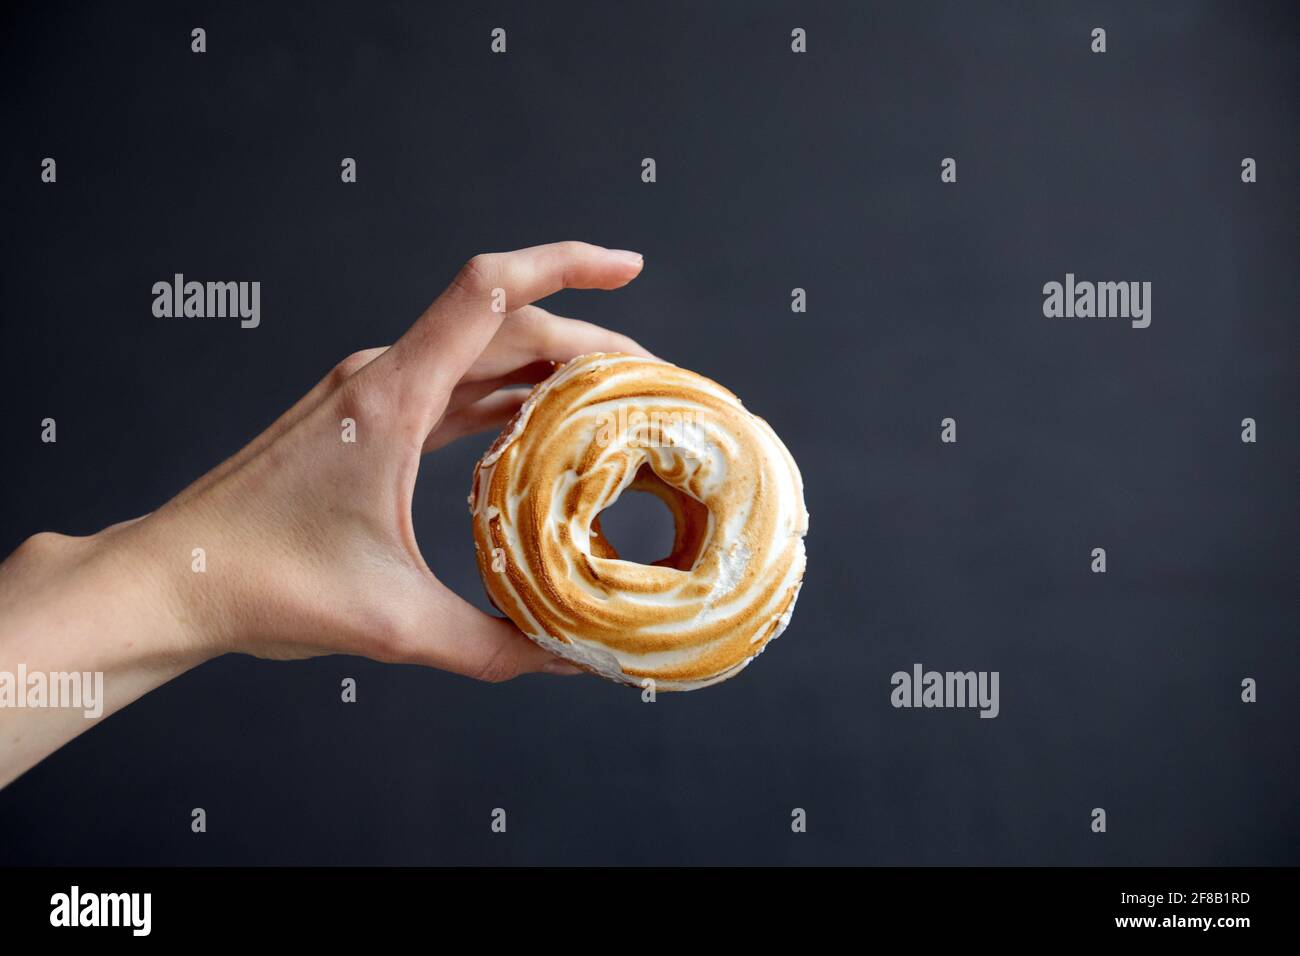 Unrecognizable person demonstrating delicious sweet French cruller near empty space against black background Stock Photo